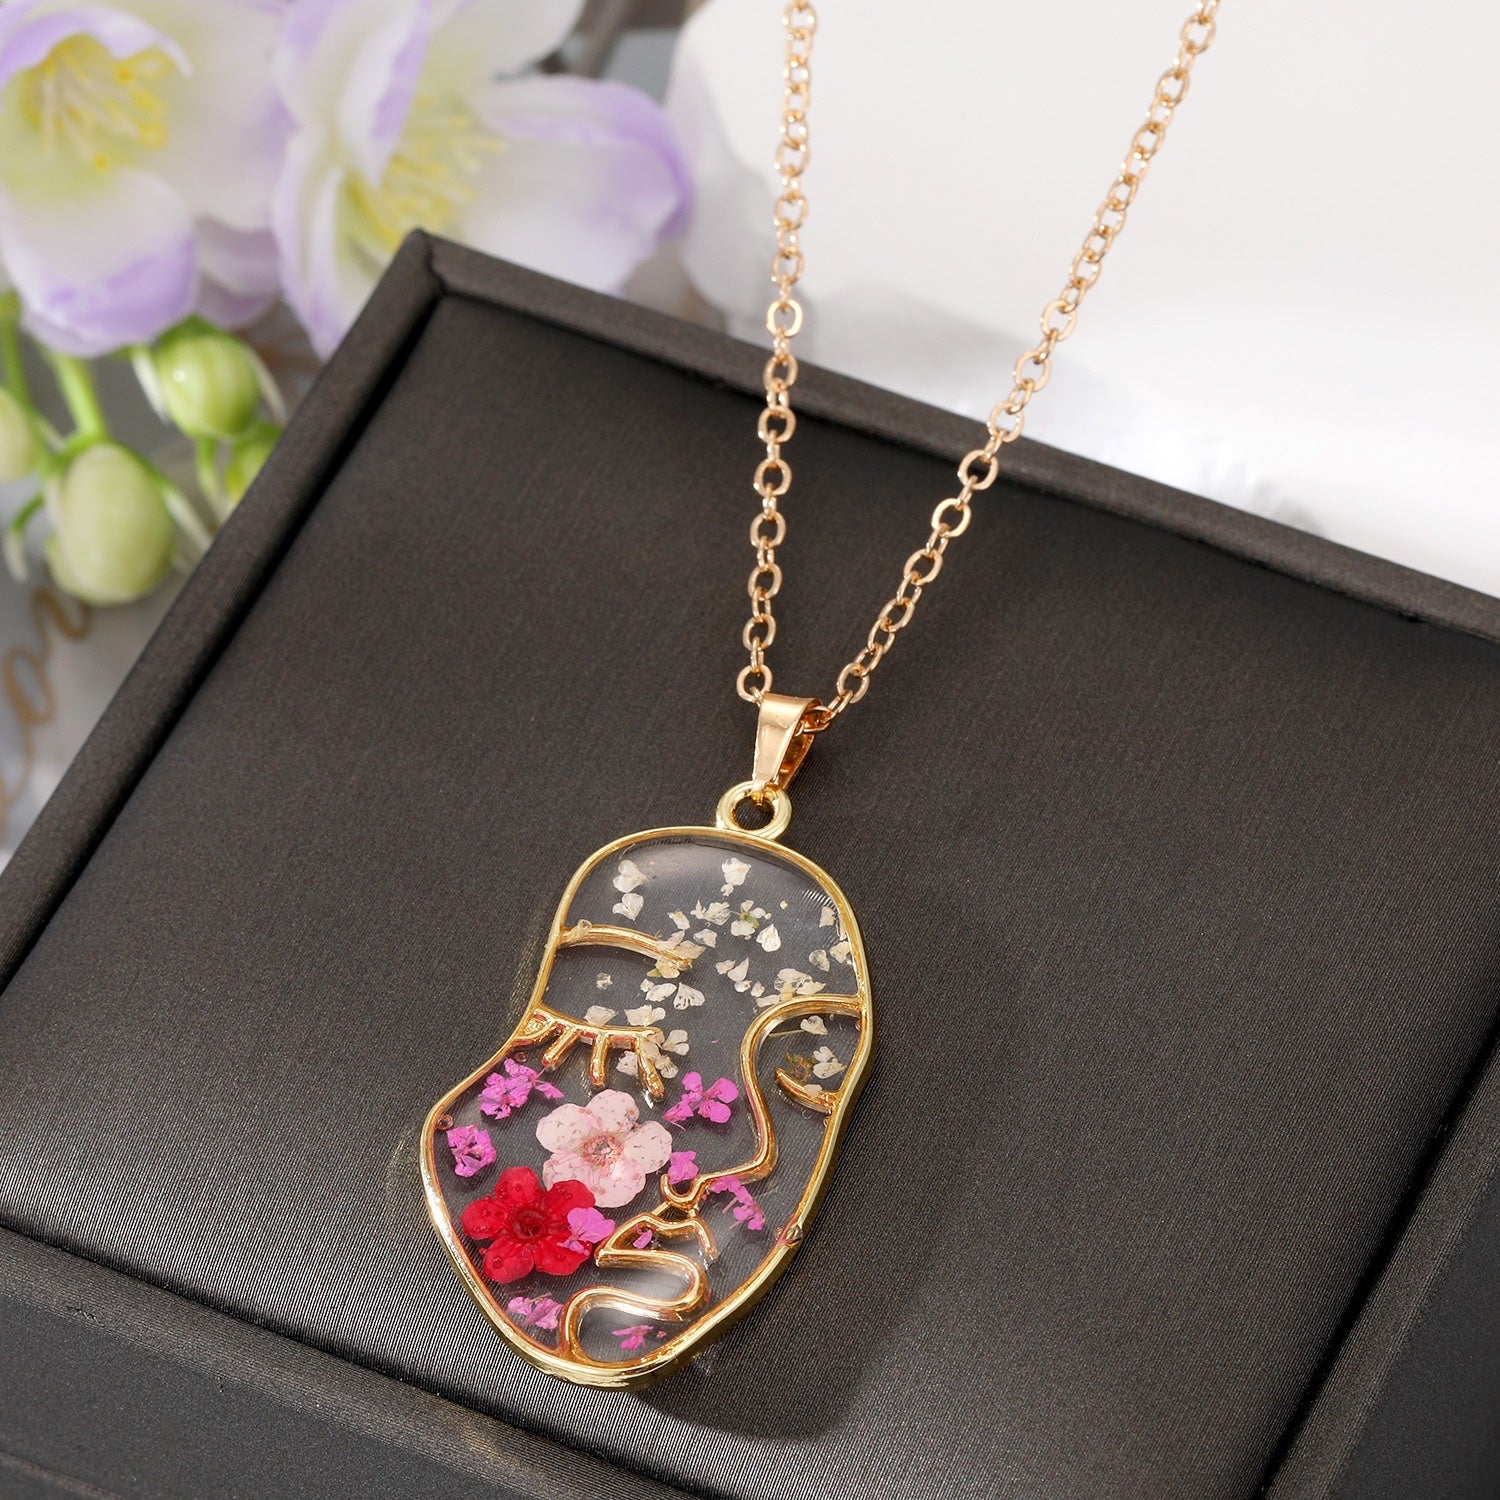 Floral Silhouette Necklace